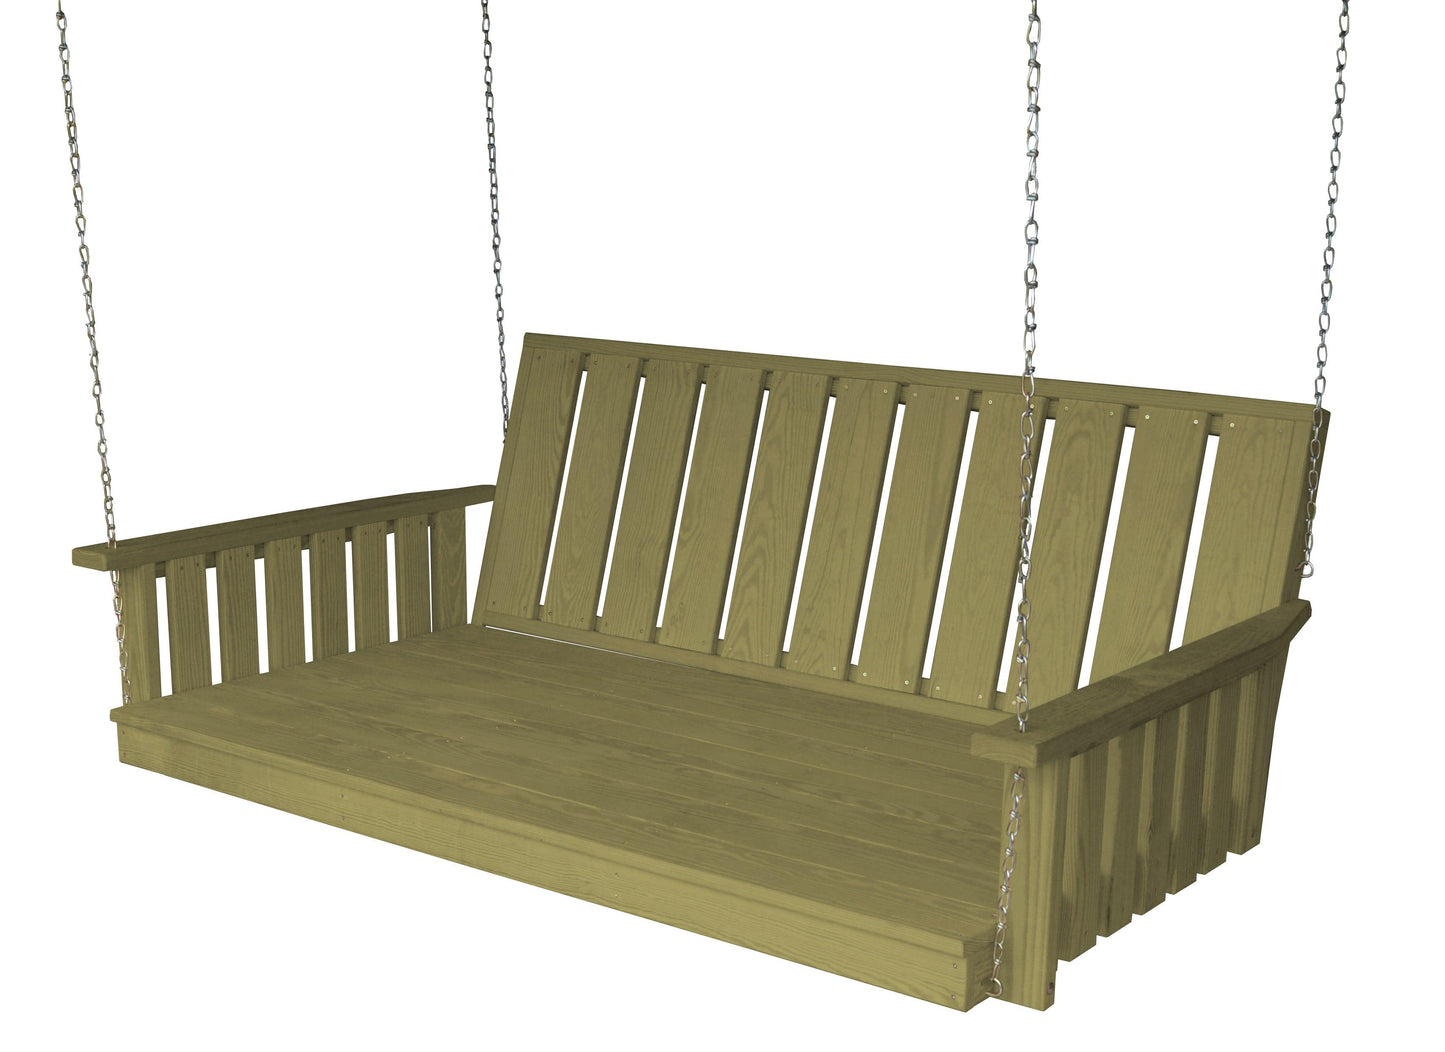 a&l pressure treated pine 75" wingate swingbed linden leaf stain